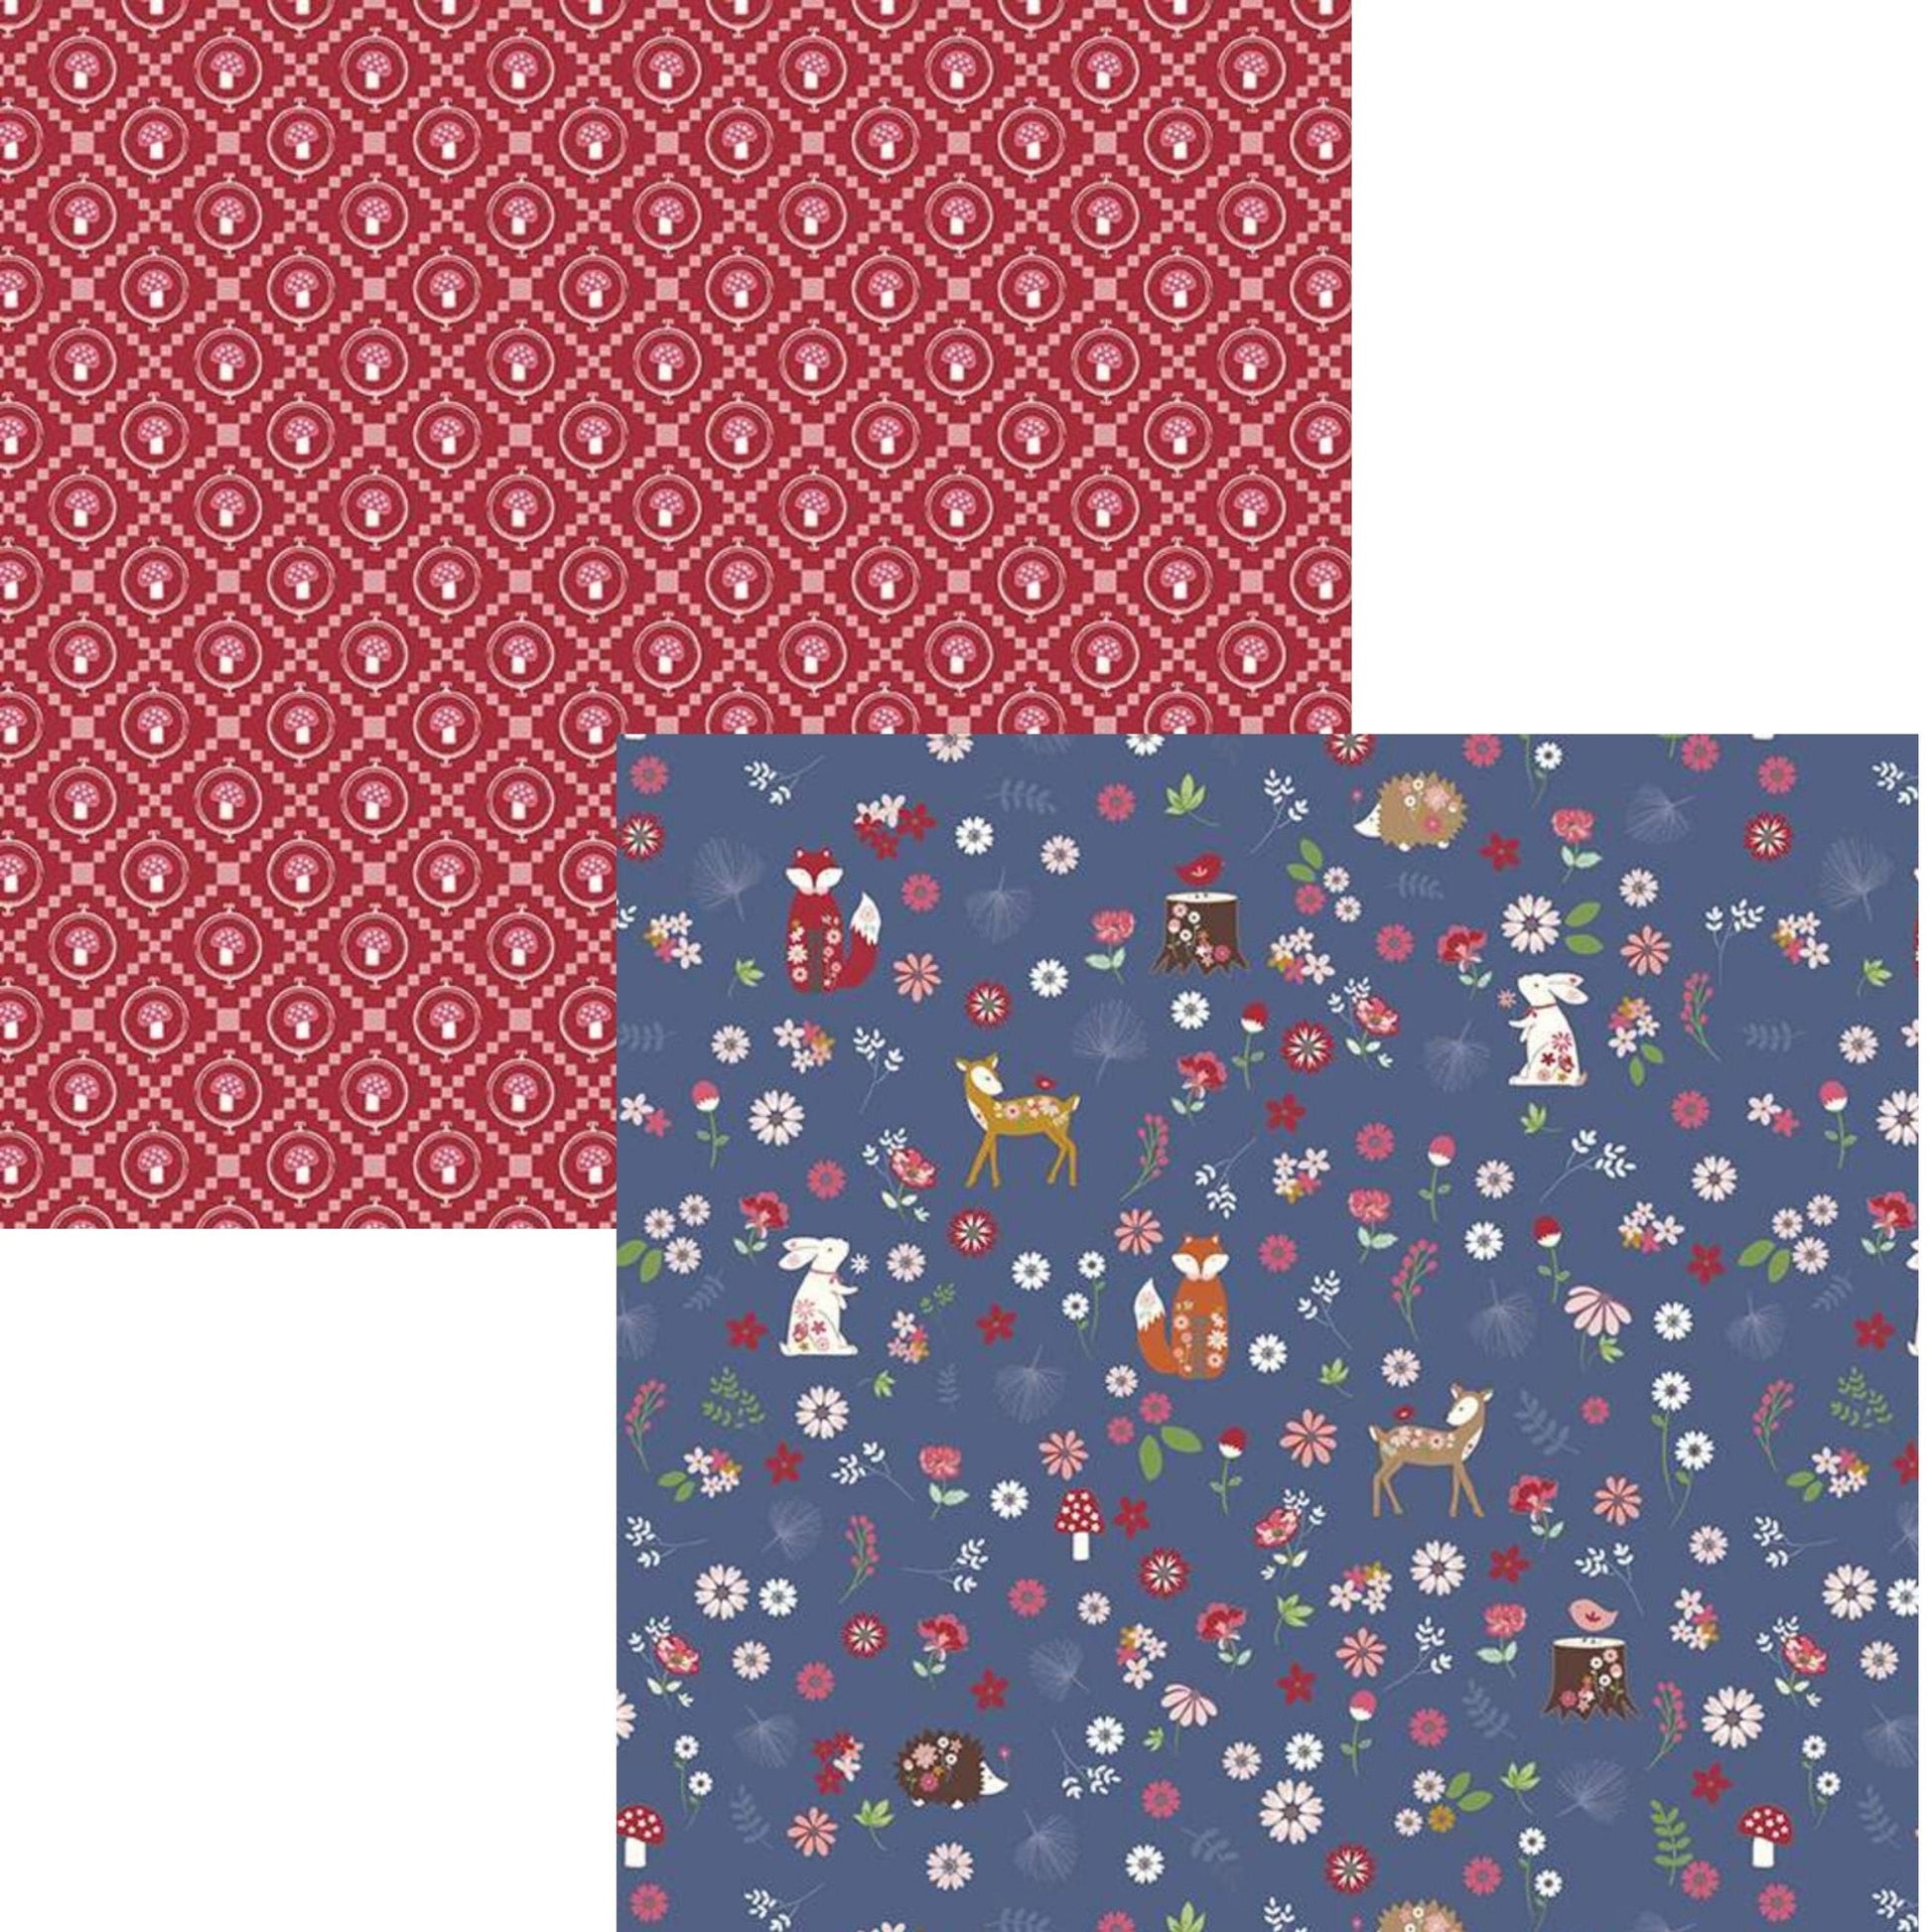 LAMINATED cotton fabric - Enchanted Mushrooms red(sold continuous by the half yard) Food Safe Fabric, BPA free